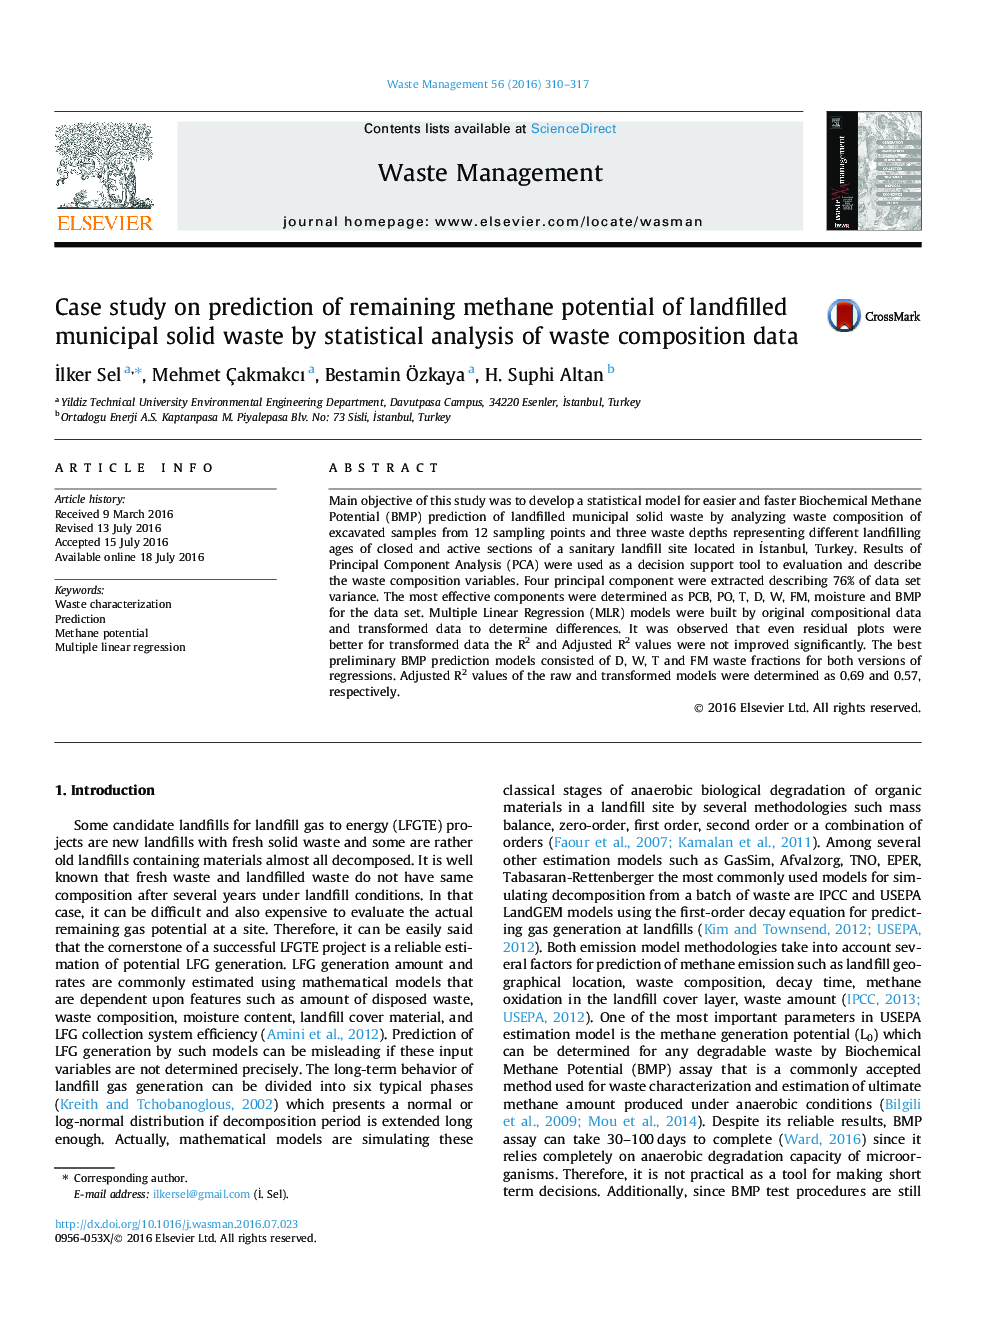 Case study on prediction of remaining methane potential of landfilled municipal solid waste by statistical analysis of waste composition data